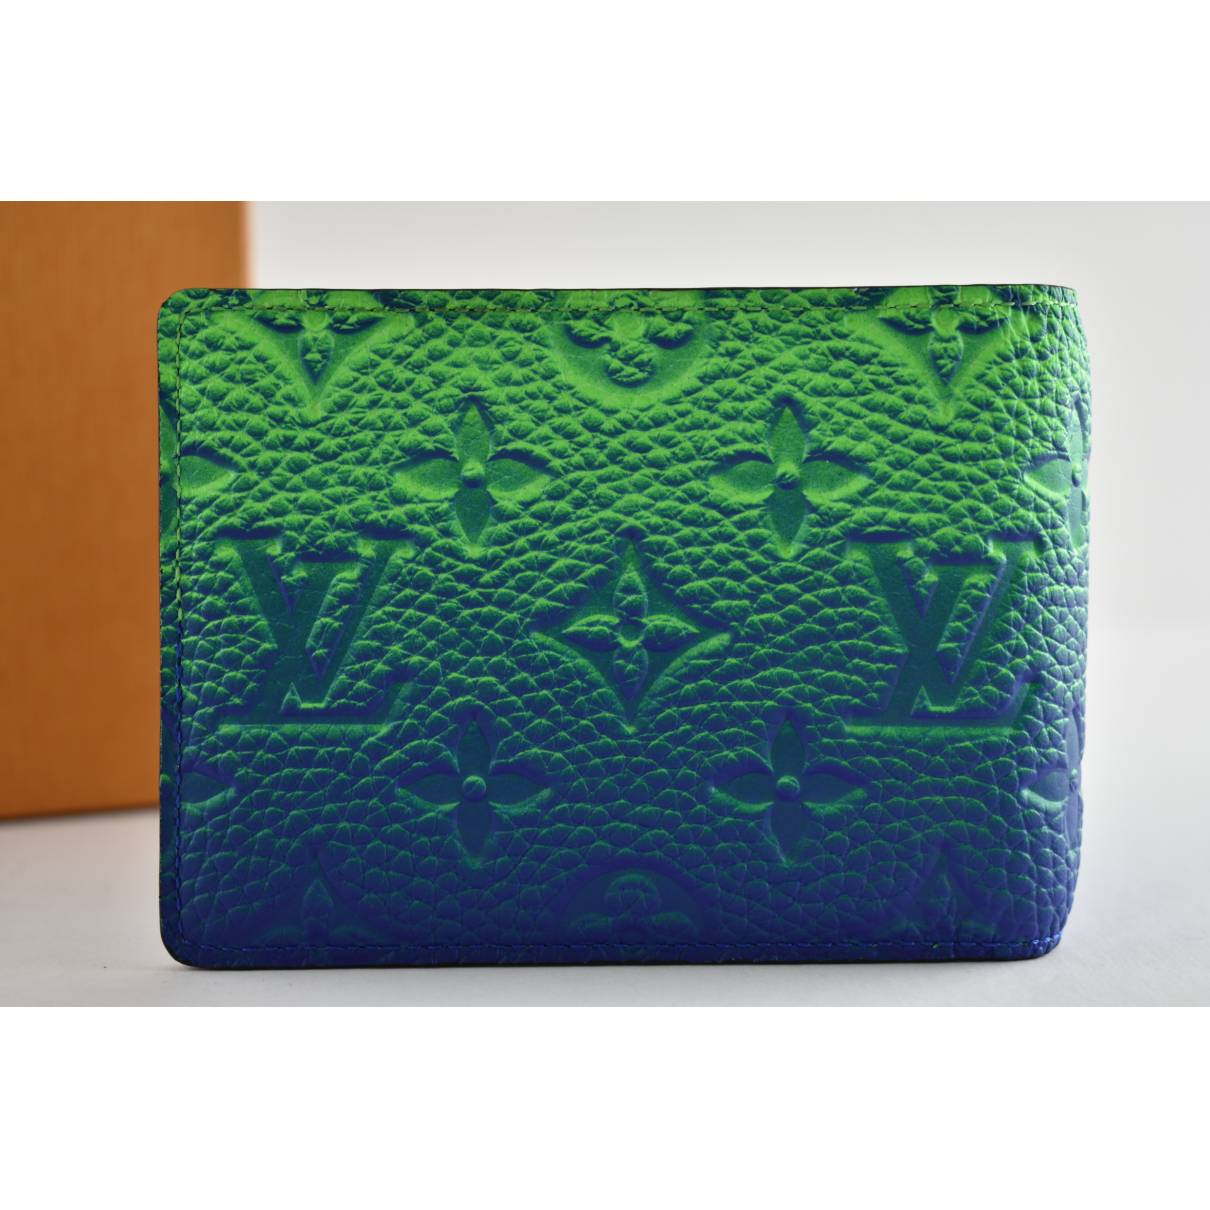 Louis Vuitton Wallet for Women  Buy or Sell your LV Wallets! - Vestiaire  Collective